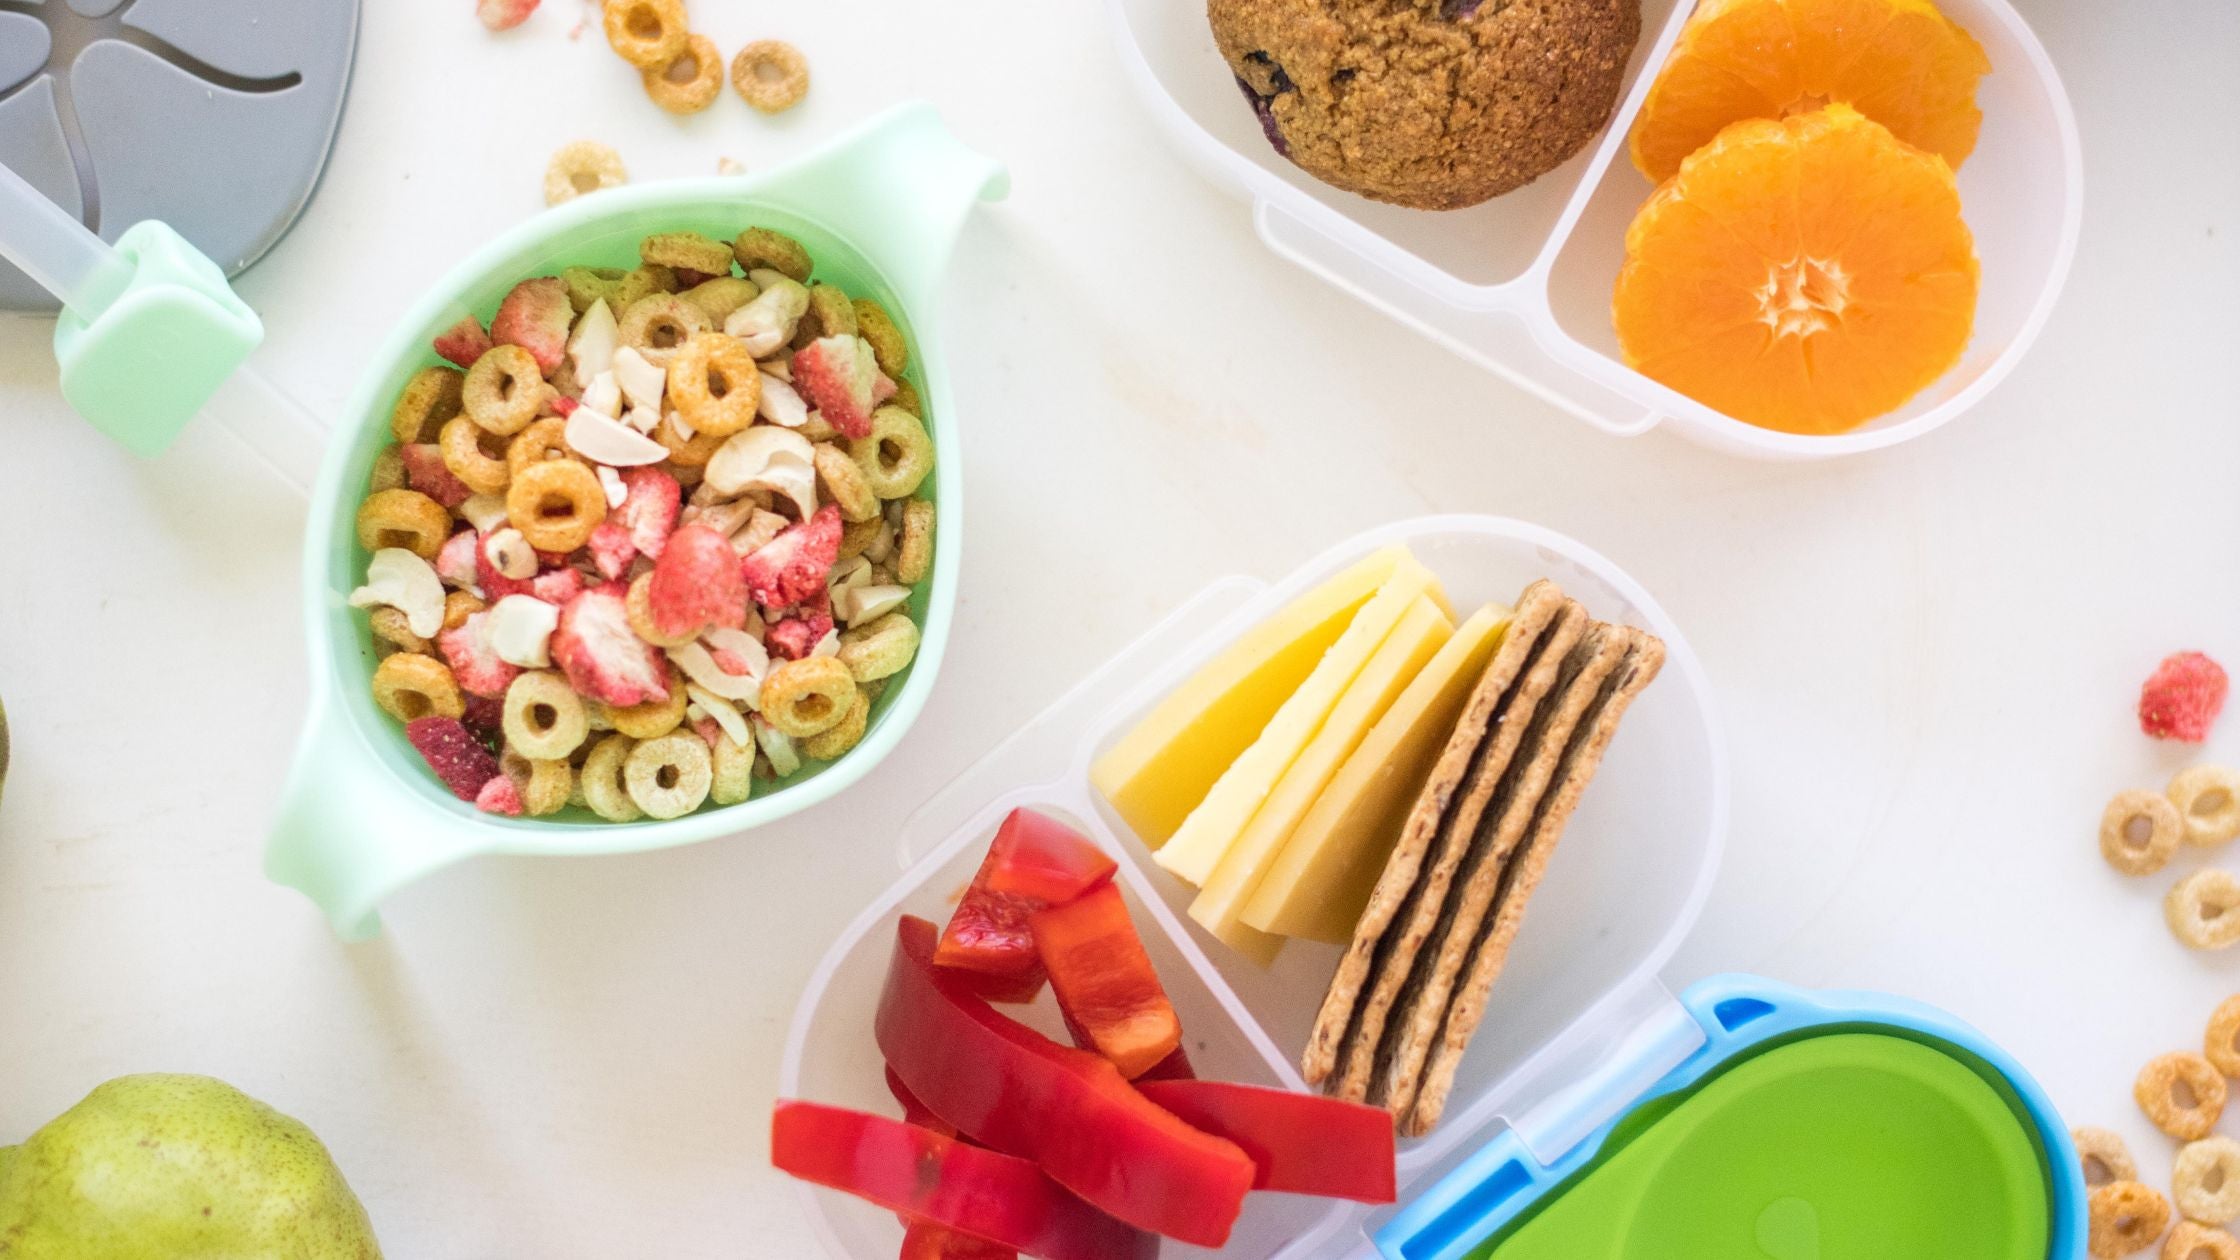 10 nutritious winter on-the-go snacks for toddlers – b.box for kids